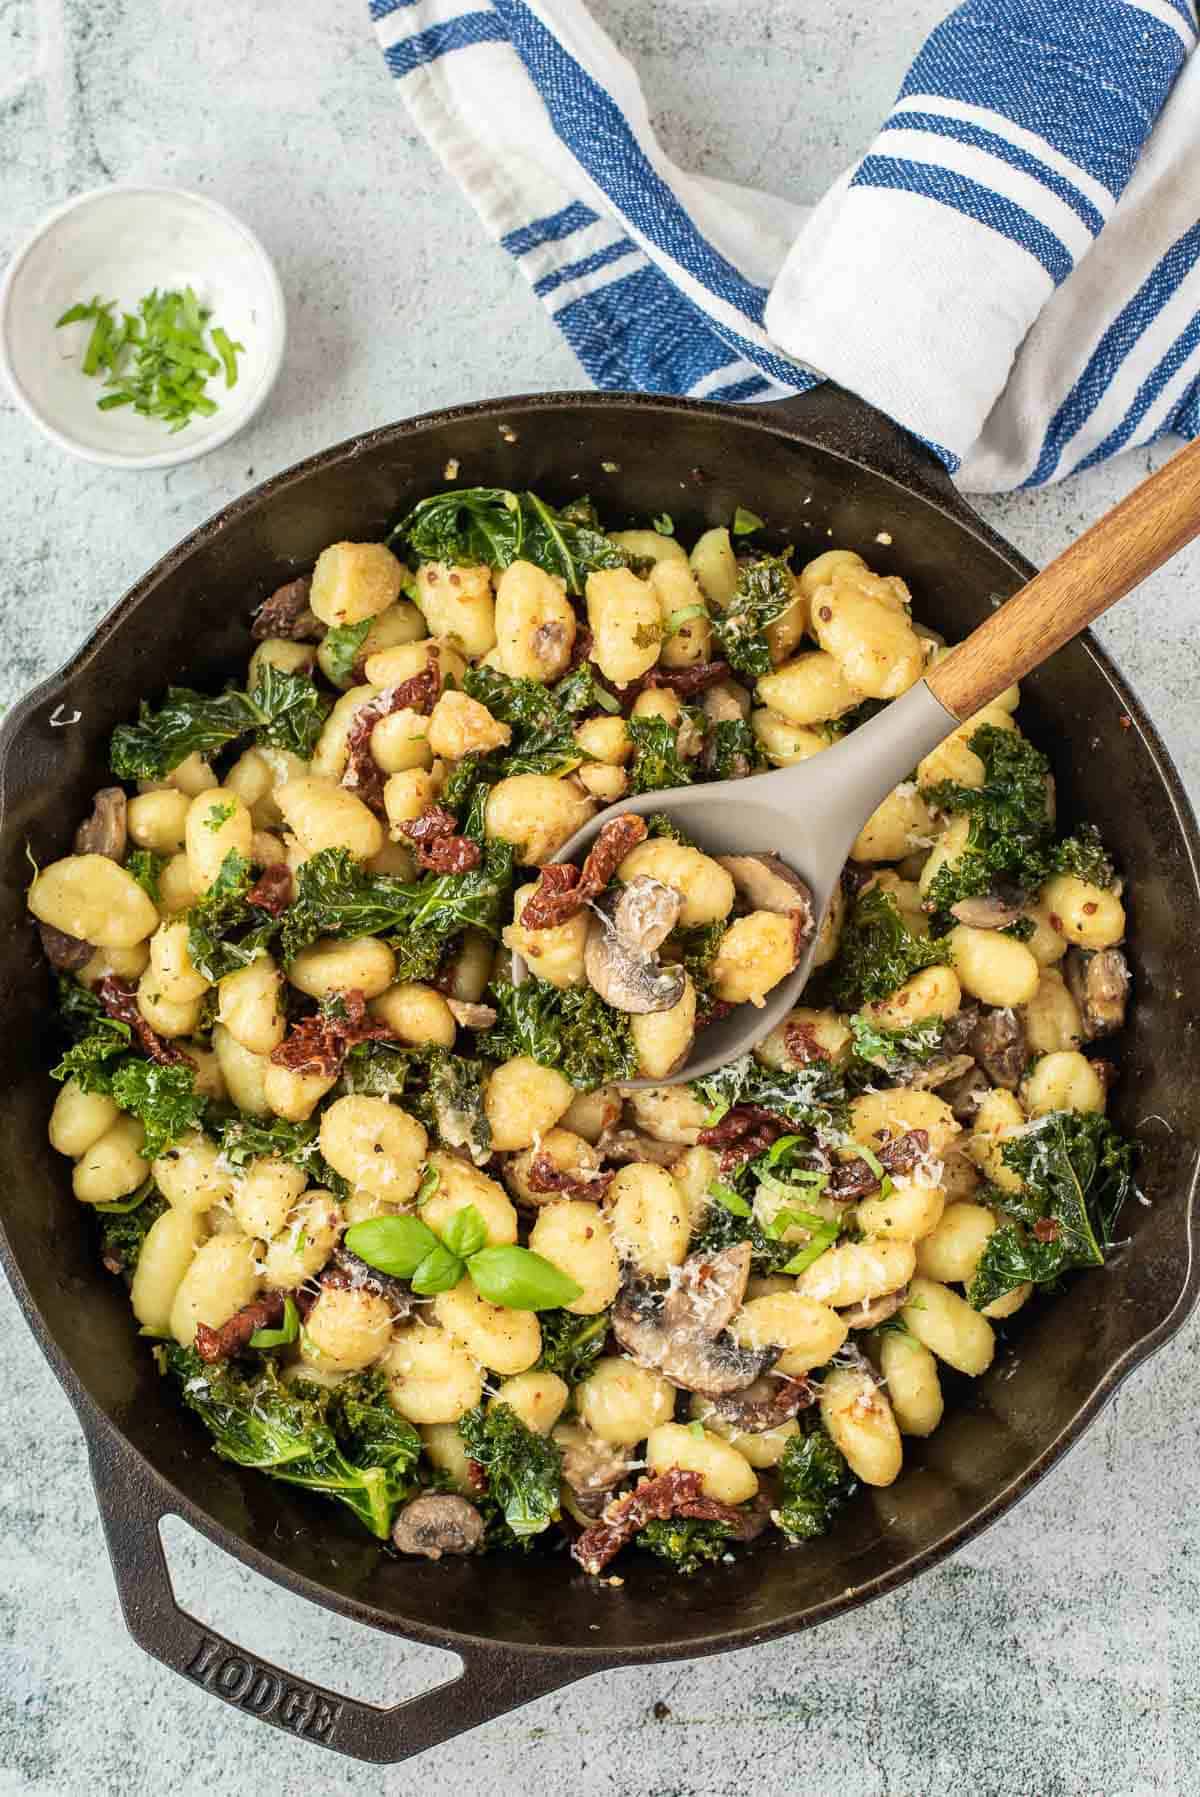 Overhead view of a black skillet filled with gnocchi with kale, sun-dried tomatoes, and mushrooms.